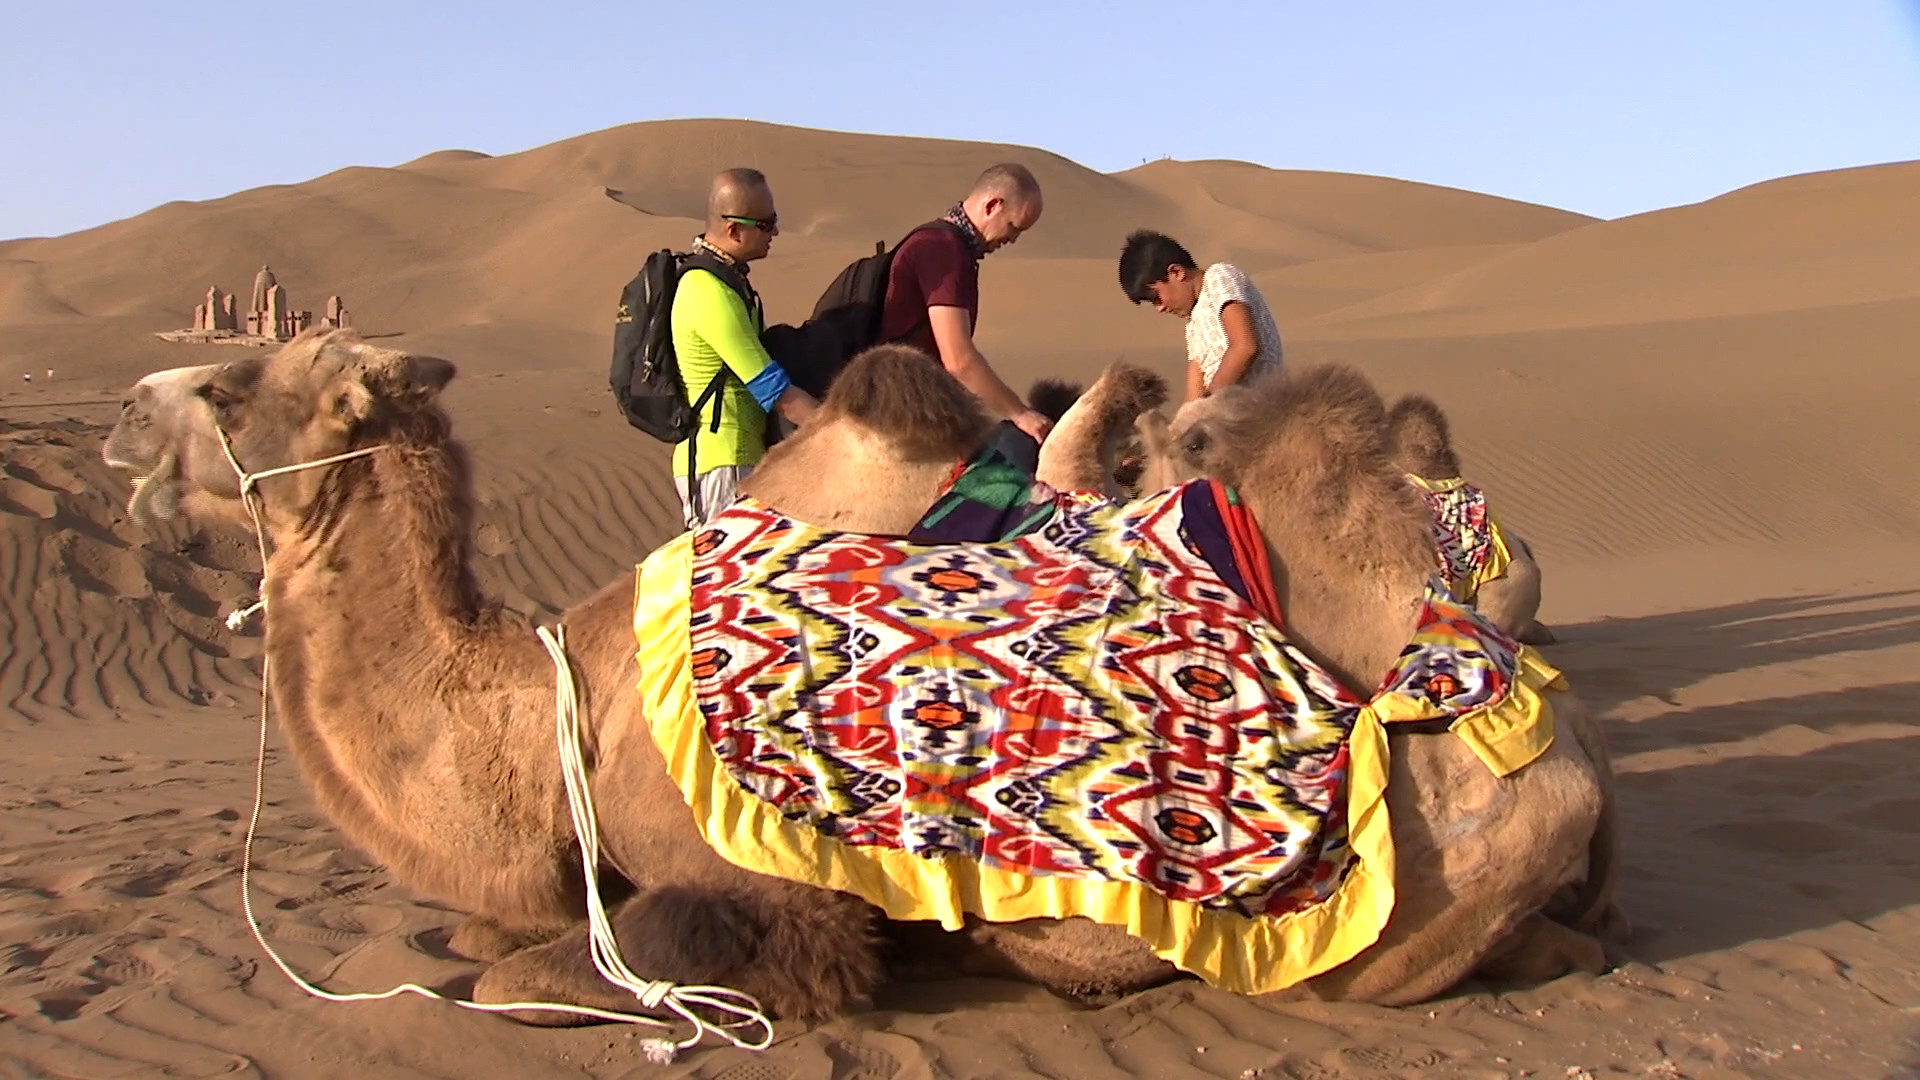 Josh Summers and Han Bin go on a camel expedition in the desert outside of Kashgar.